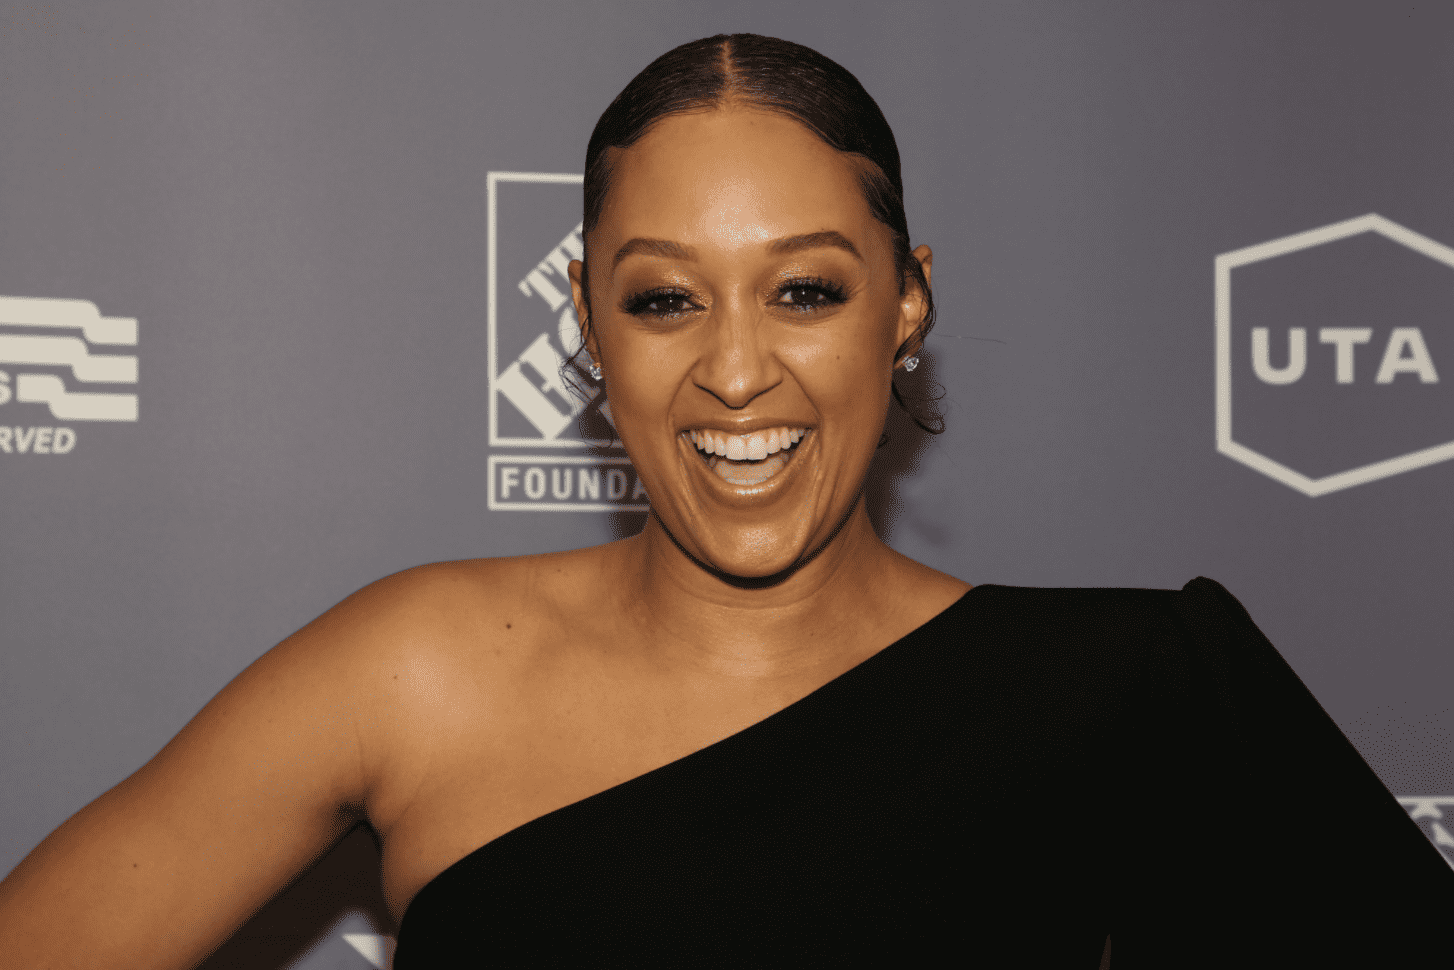 Tia Mowry at the 2019 US Vets Salute Gala on November 05, 2019 in Beverly Hills, California. | Source: Getty Images